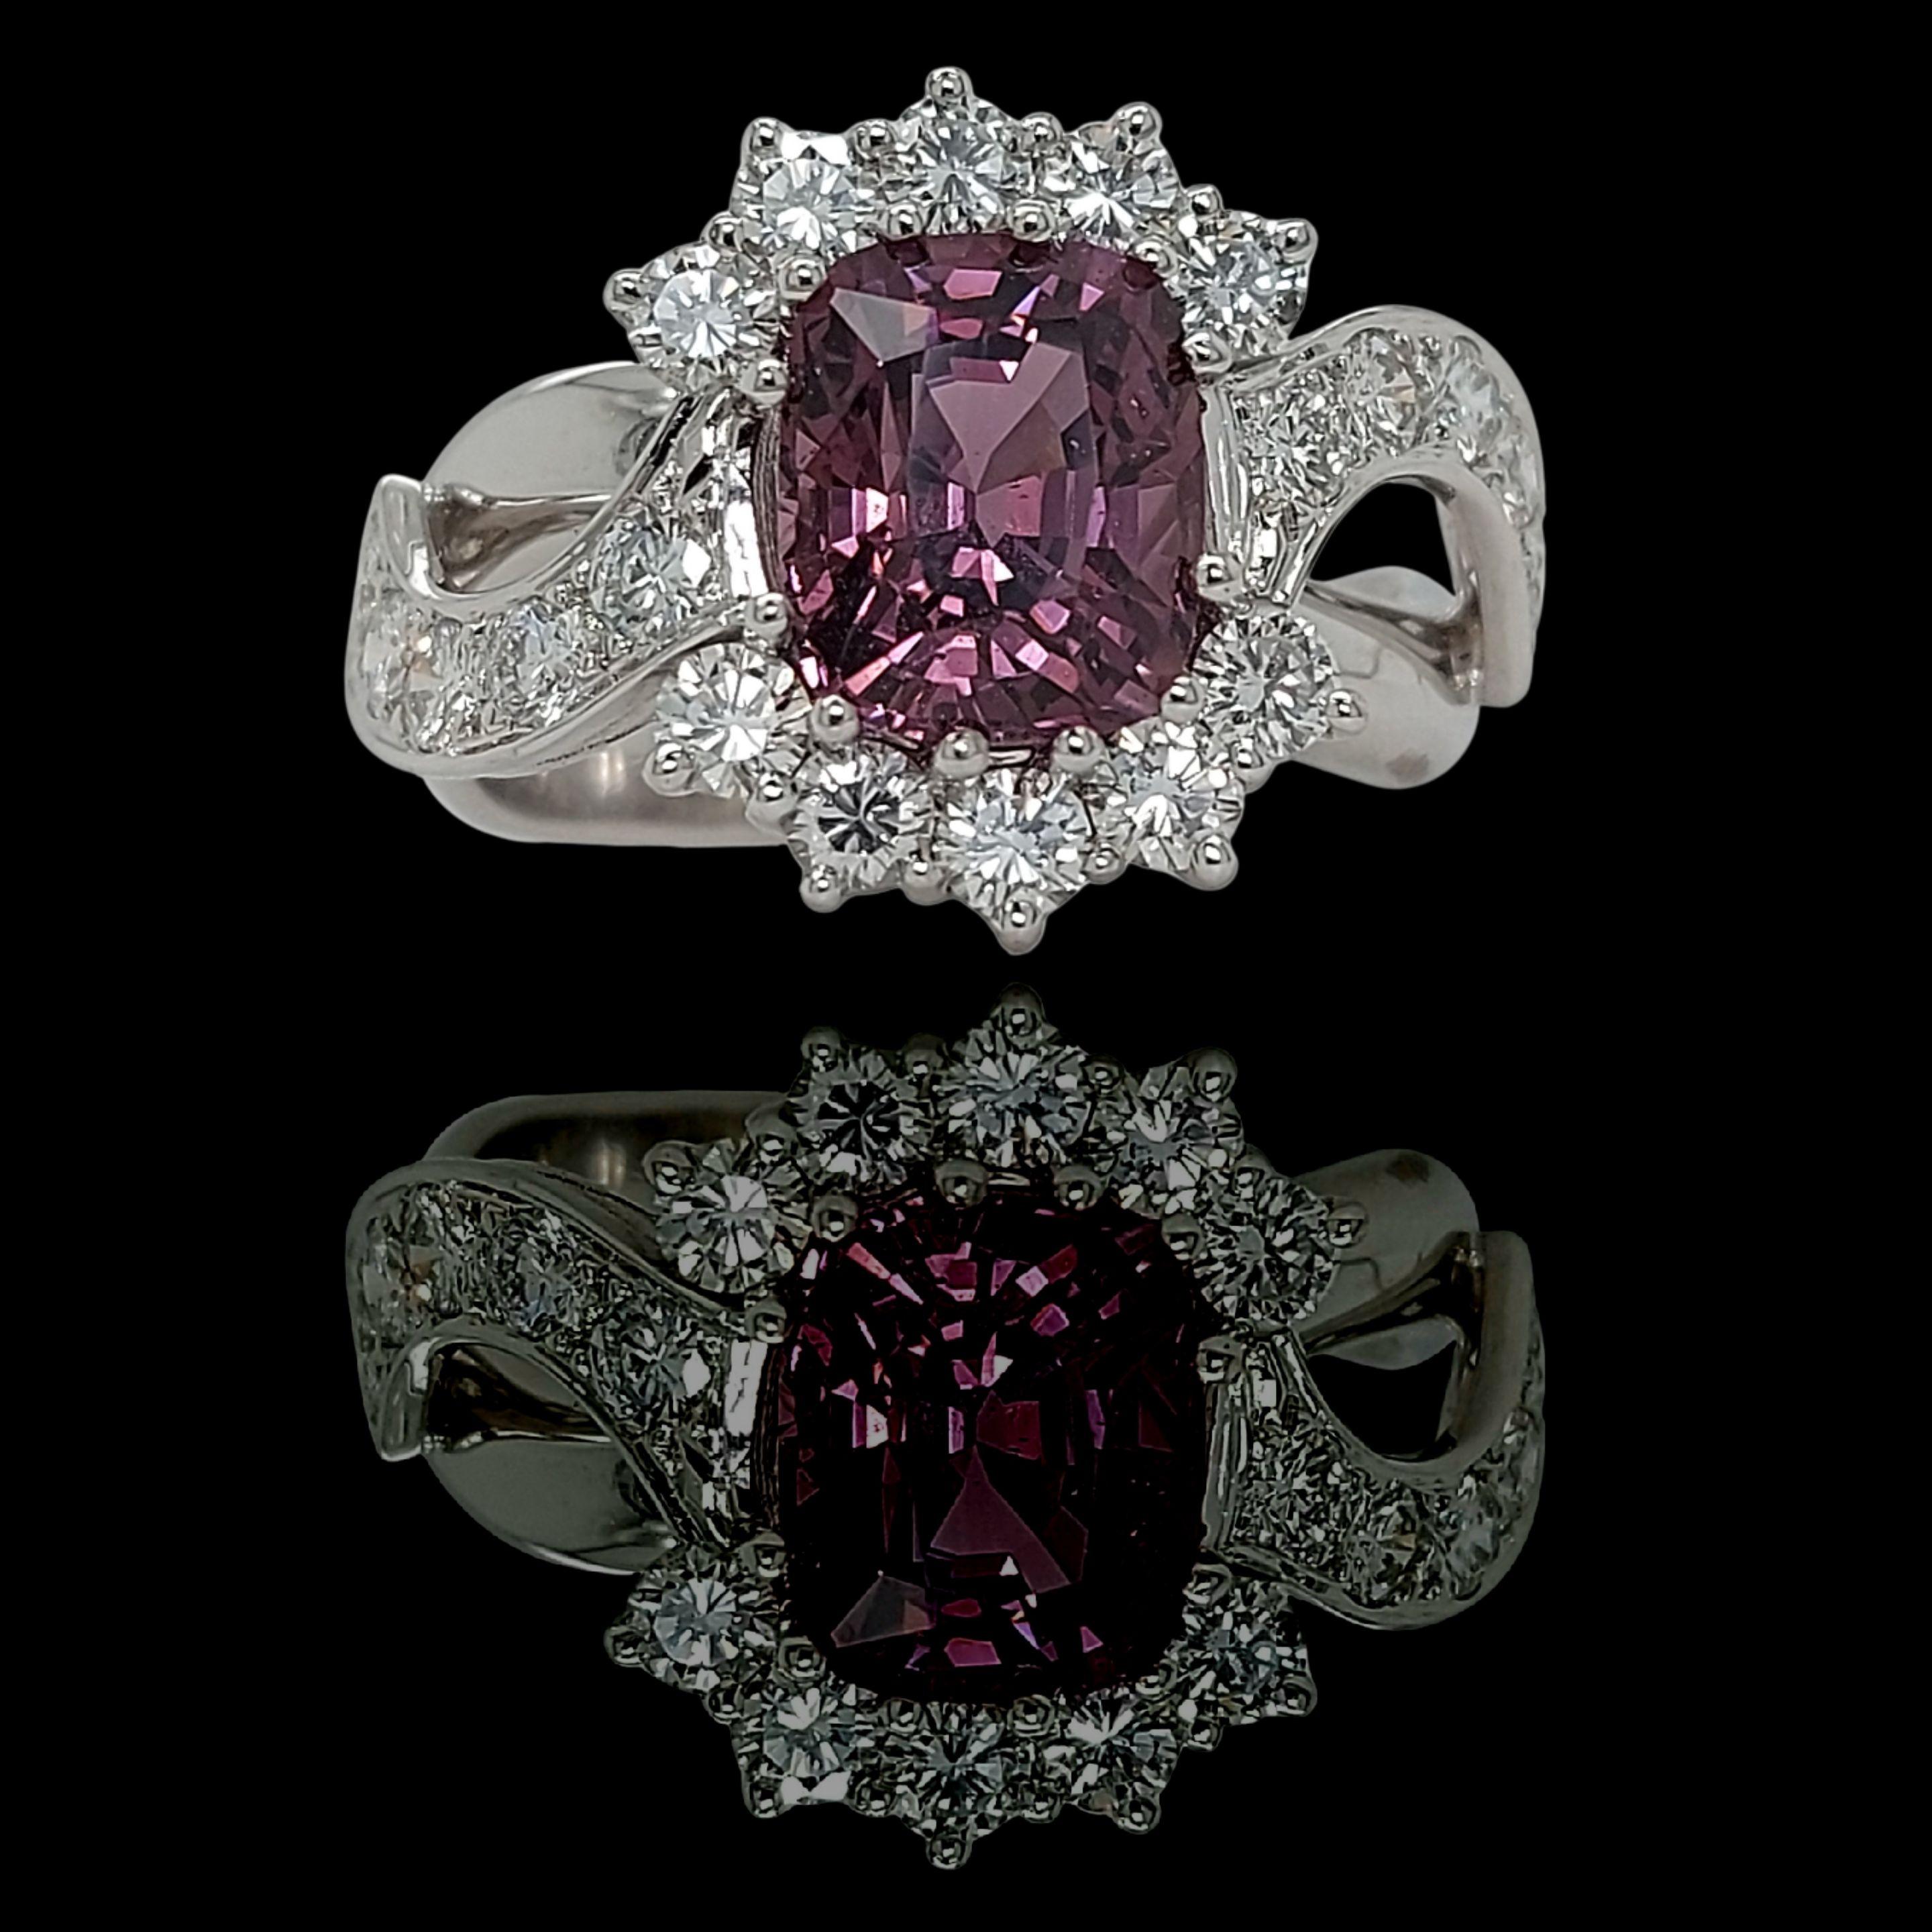 18kt White Gold Ring with a 3.25 Ct No Heat Spinel Spinel stone and 1.2ct Diamonds

Exclusive handcrafted 18 kt diamond Spinel Ring,One of a kind.

Stone: Natural Unheated Spinel stone 3.25 Carat

Diamonds: 20 brilliant cut diamonds, together 1.2ct